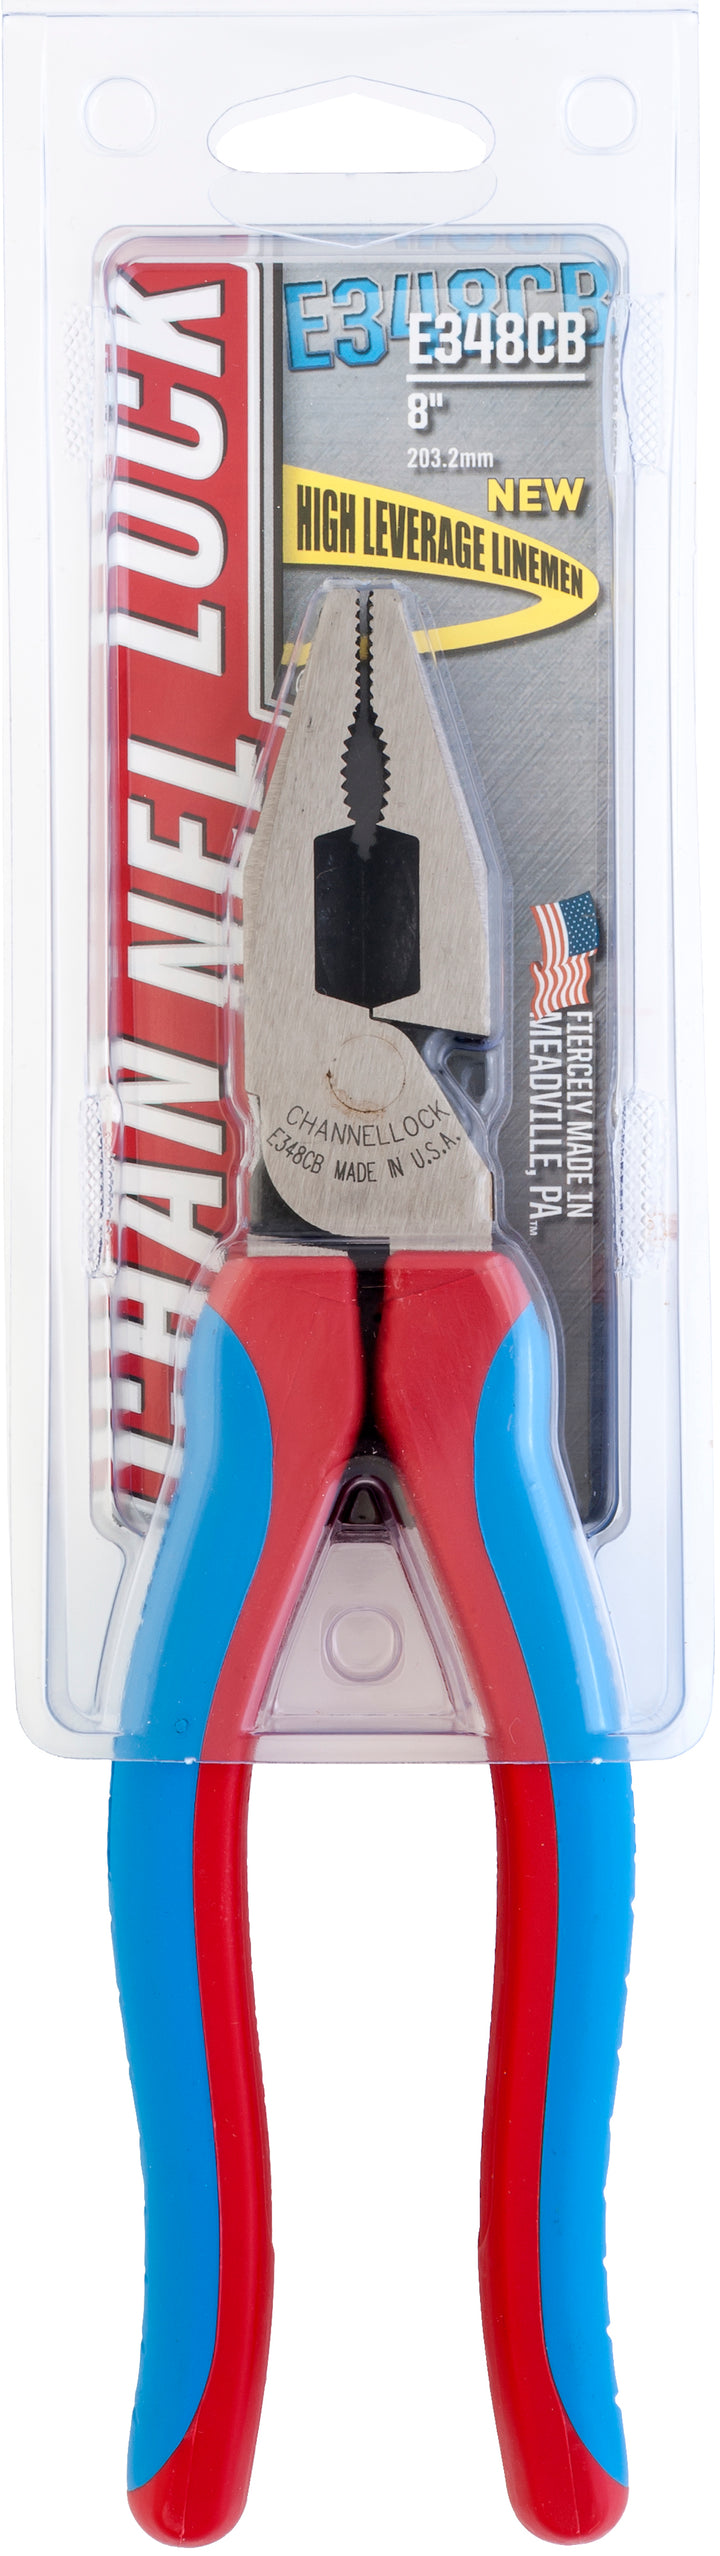 Channellock 7.5 In. Carbon Steel End Cutting Pliers - Total Qty: 1 357